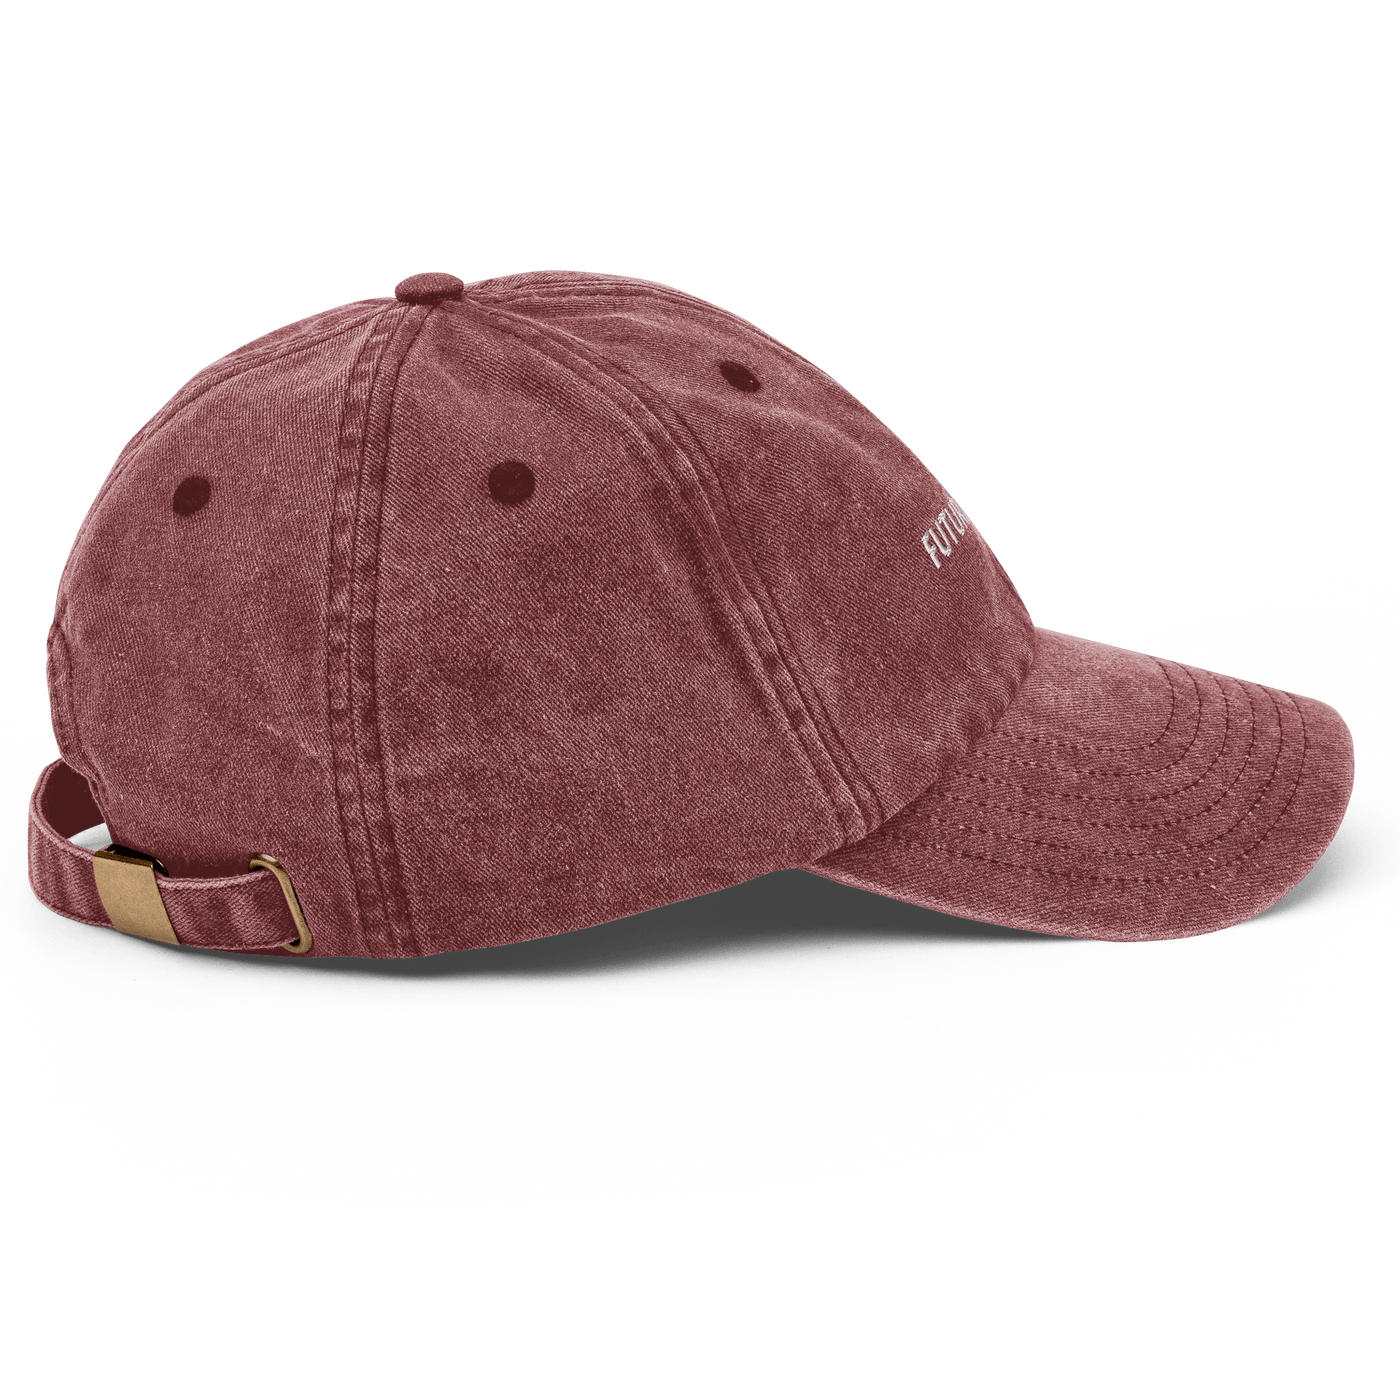 Future Dilf Vintage Hat - Vintage Red - - Just Another Cap Store